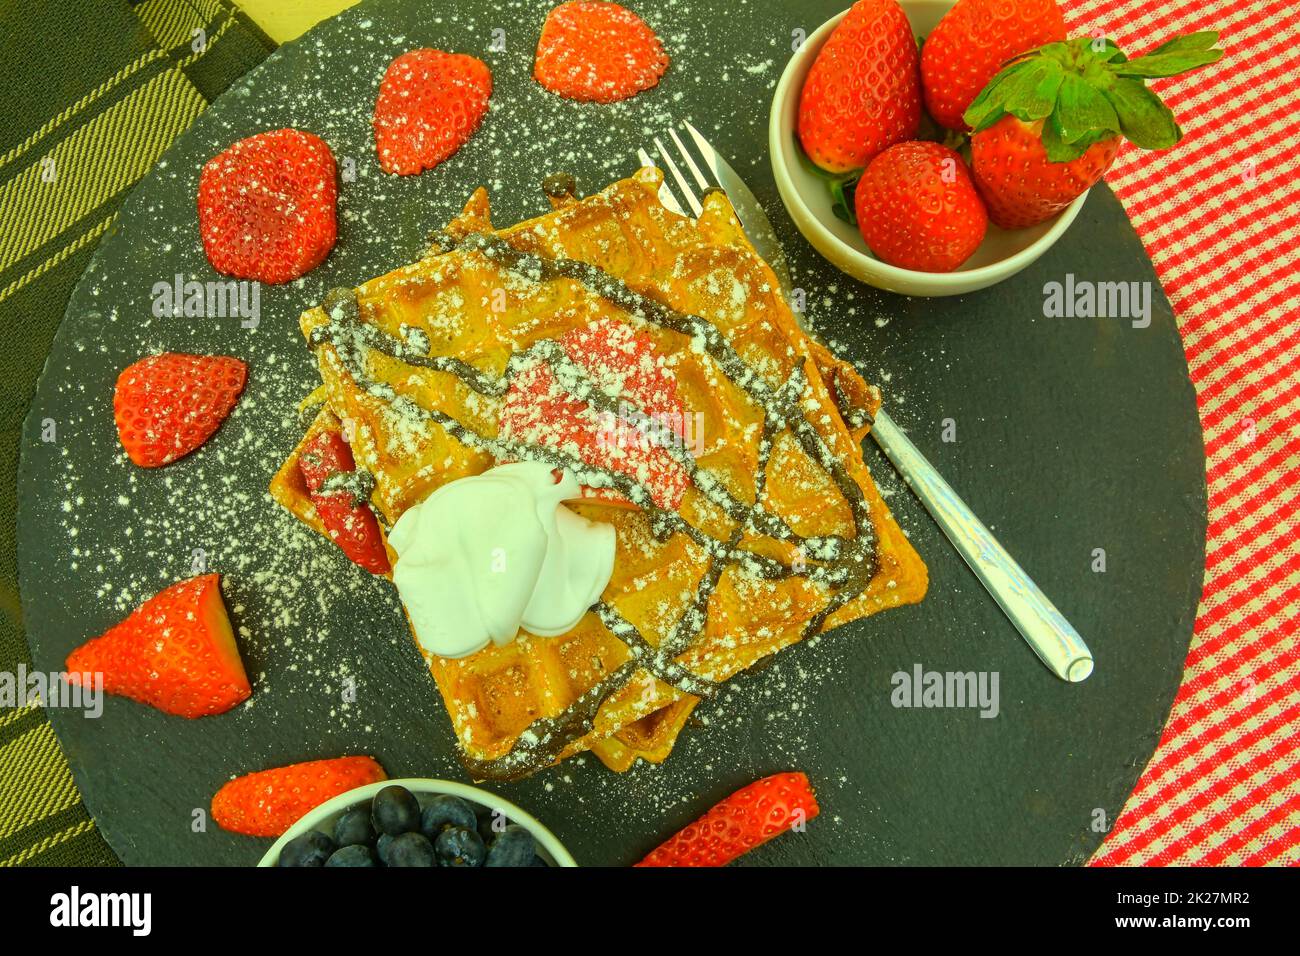 Square Belgian waffles with berries and icing sugar on a black plate. Tasty sweet sugary waffles. Melted chocolate and whipped cream on waffles. Top view Stock Photo